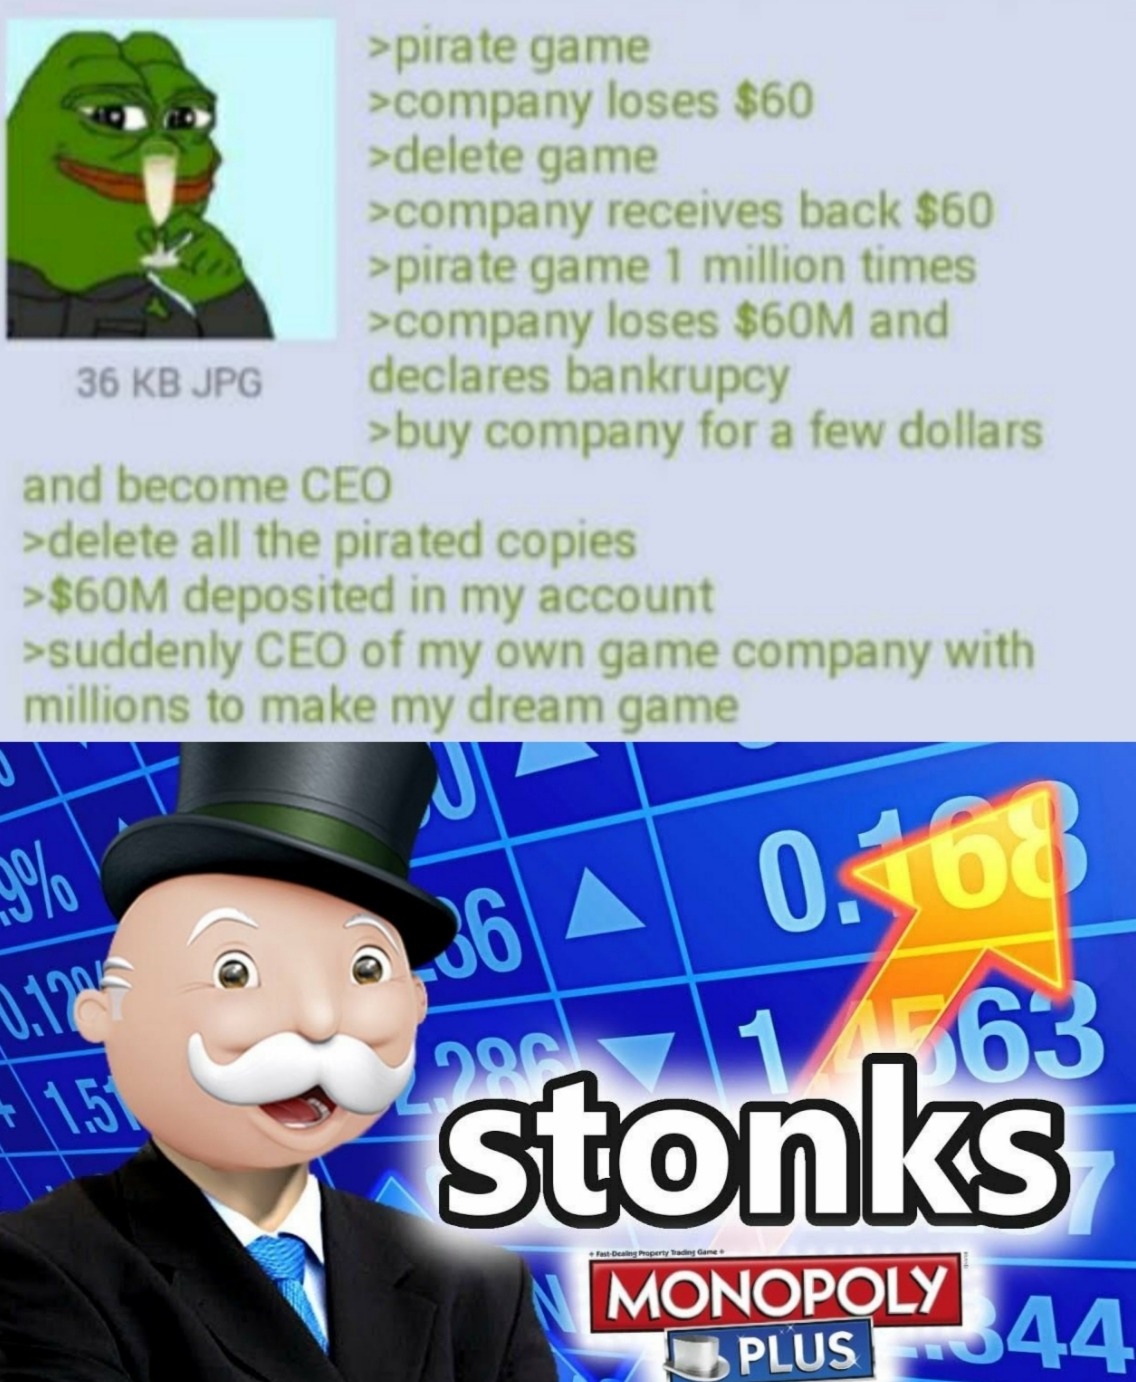 funny gaming memes -  stonks memes funny - >pirate game >company loses $60 >delete game >company receives back $60 >pirate game 1 million times >company loses $60M and 36 Kb Jpg declares bankrupcy >buy company for a few dollars and become Ceo >delete all 